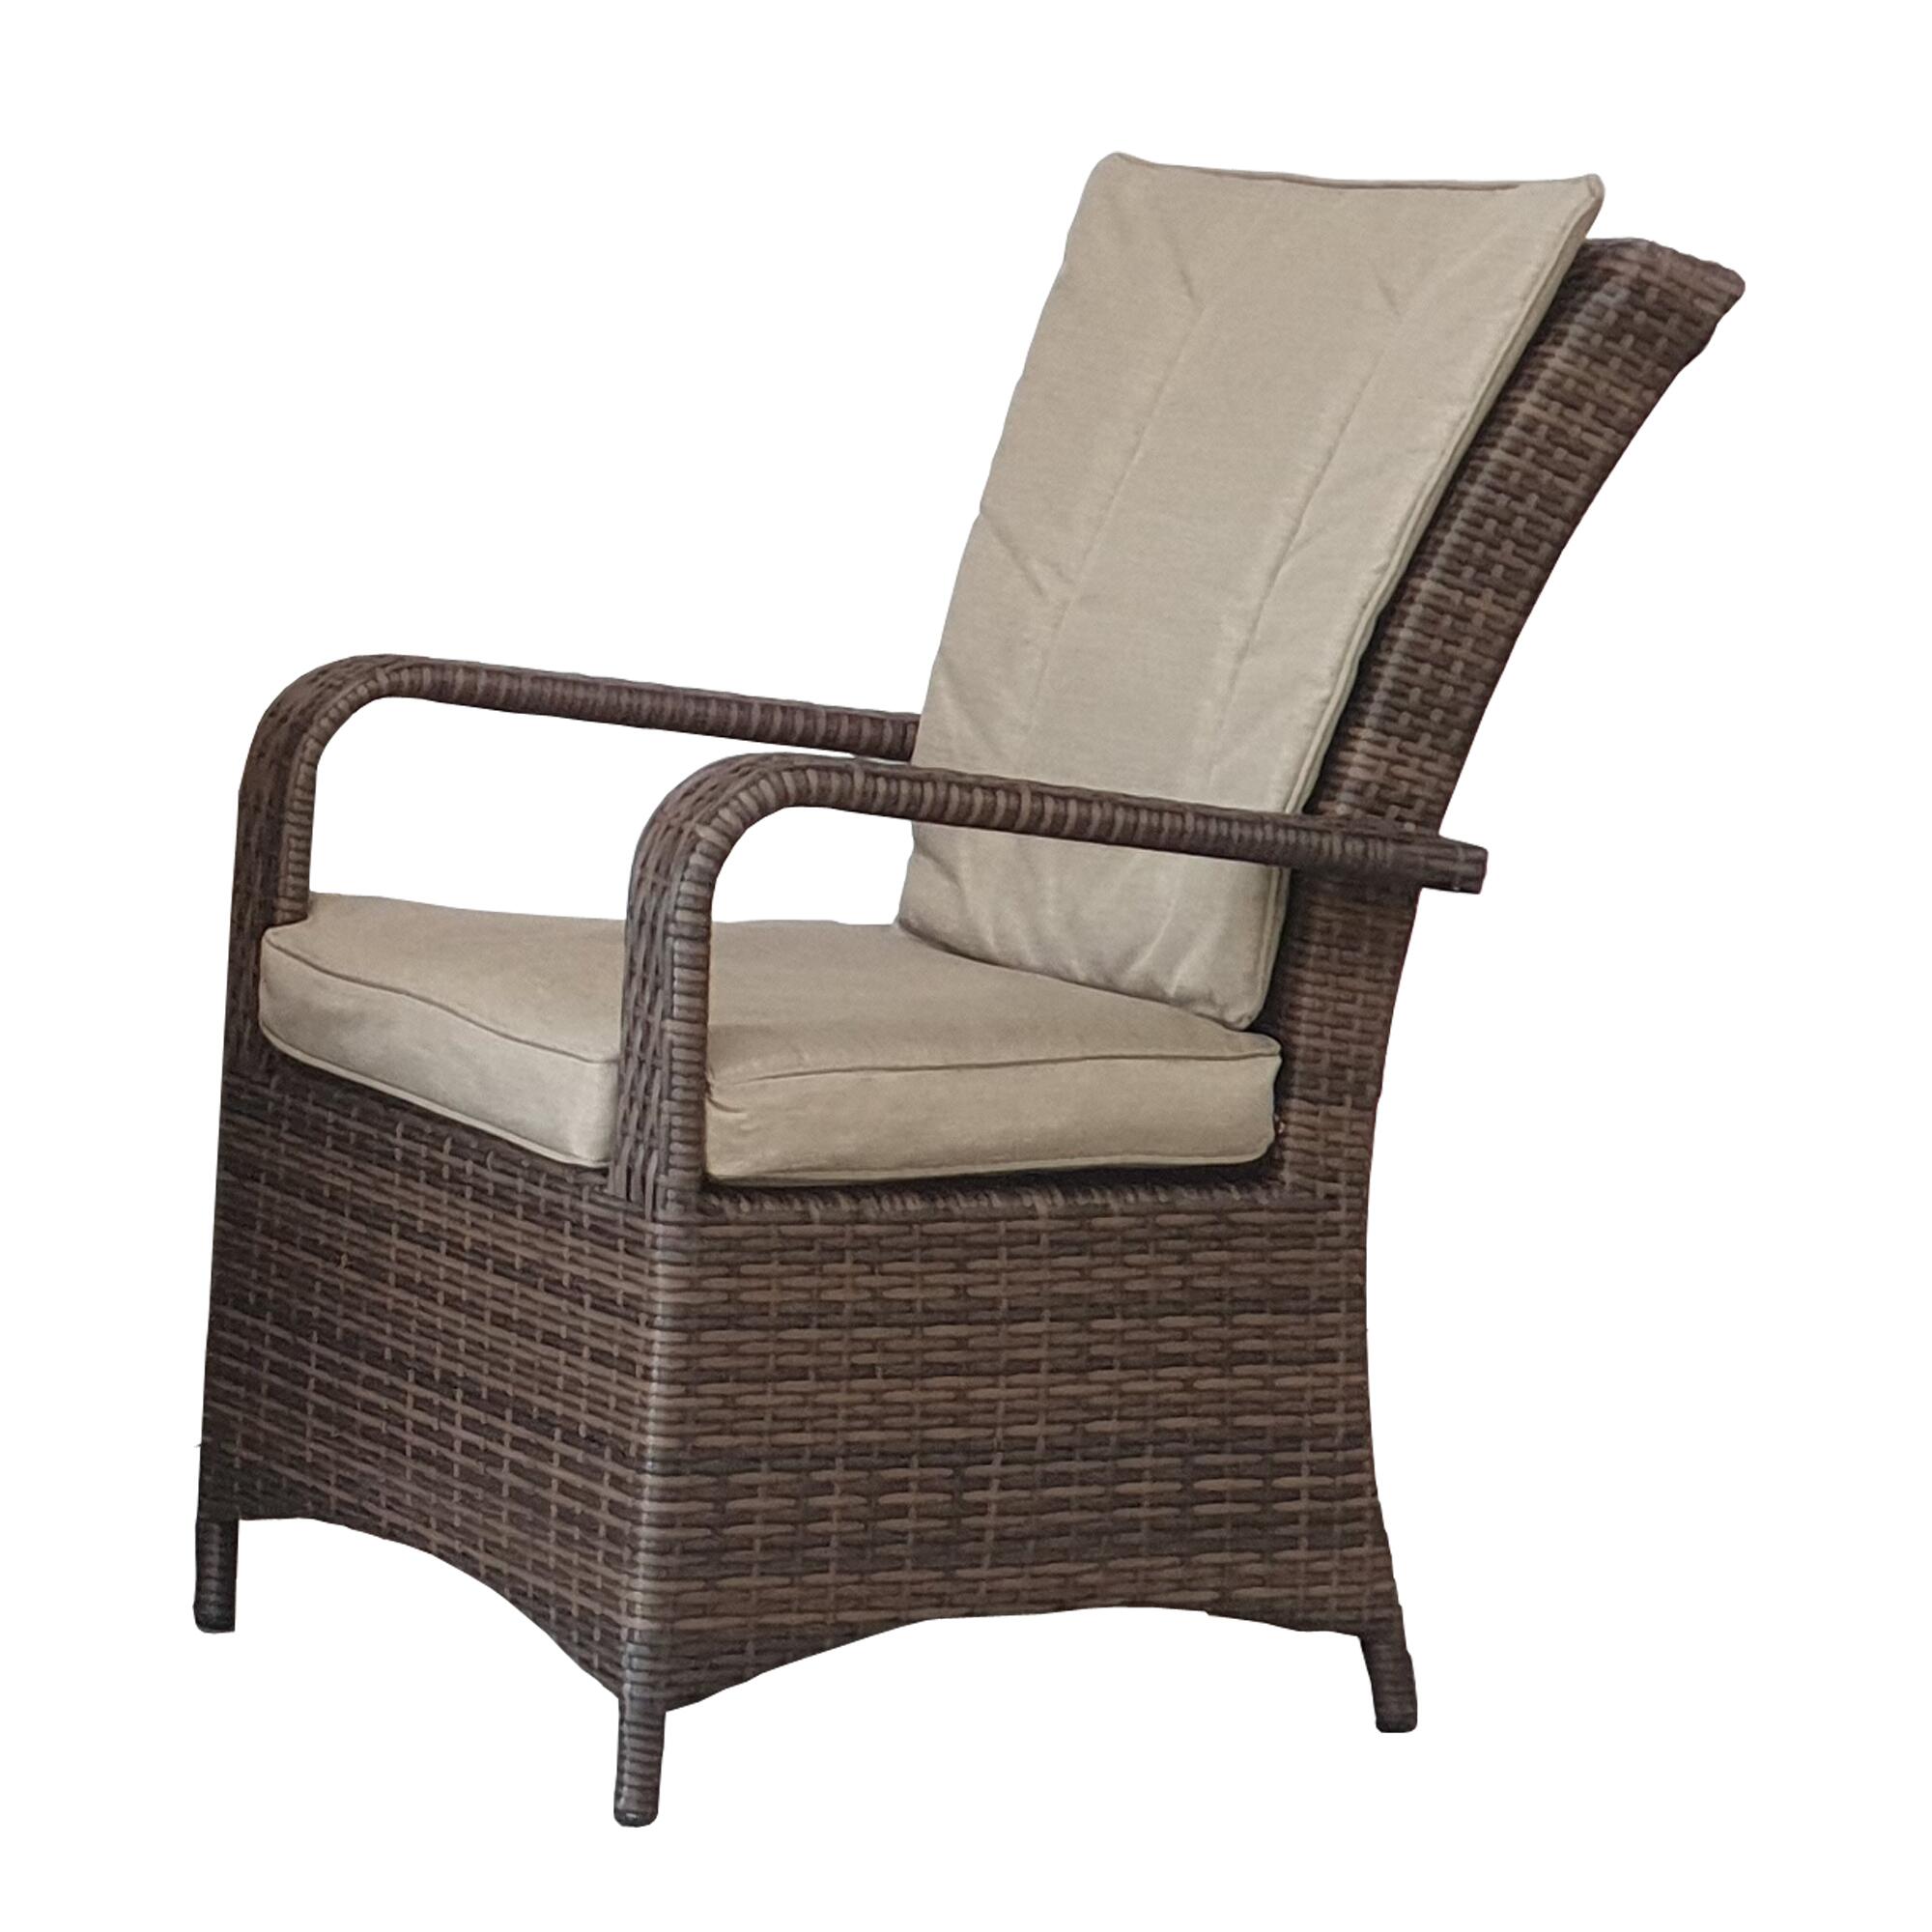 An image of Signature Weave Florence Pair Of Dining Chairs Brown Garden Furniture